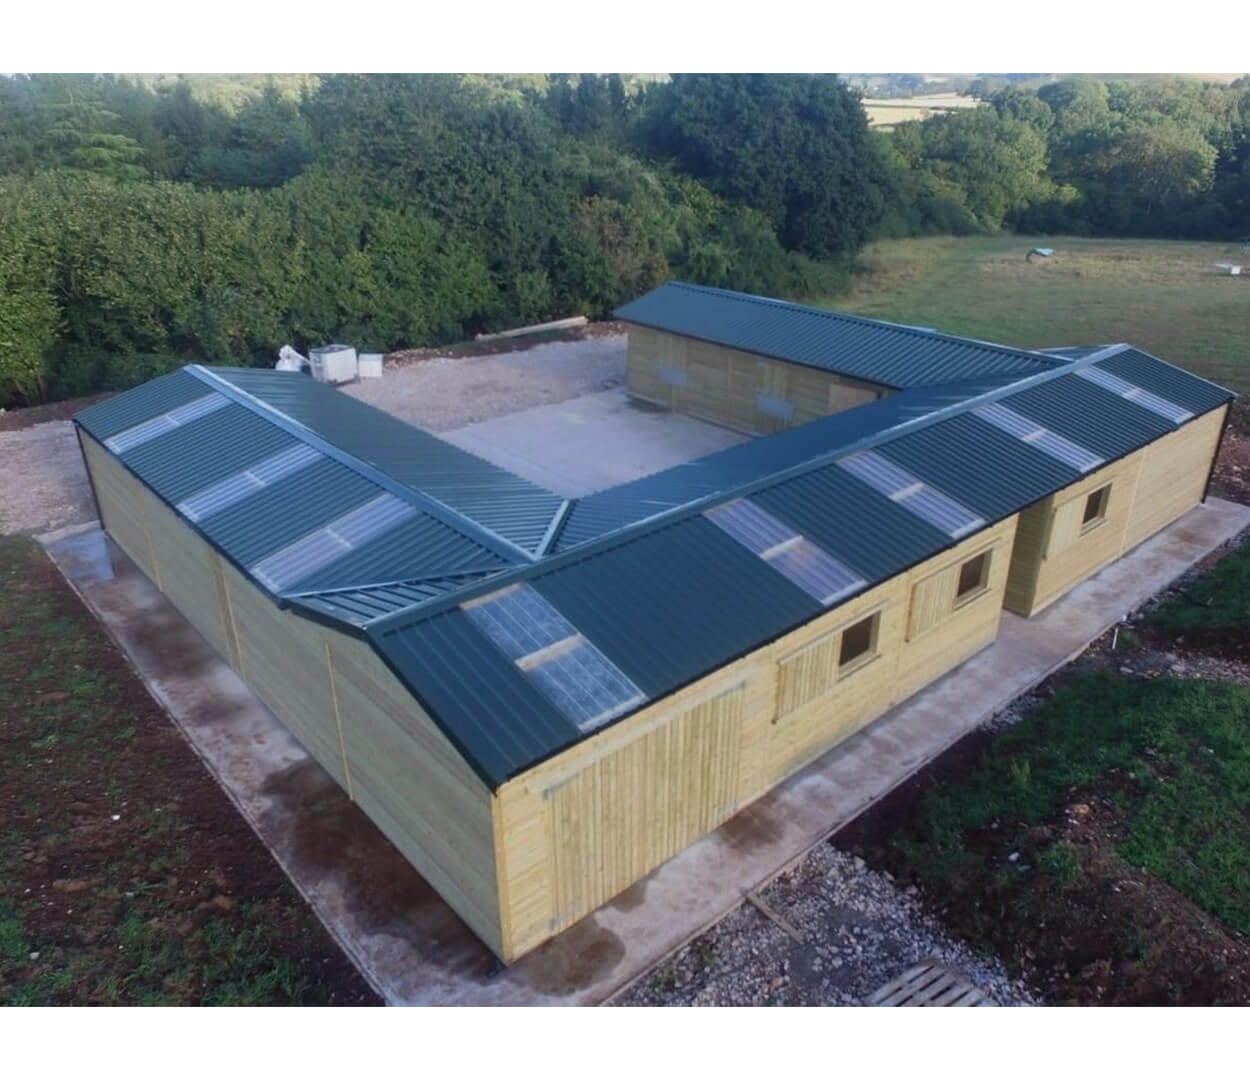 PVC Juniper Green roofing sheets give this stables a modern, yet culturally sound look without impeaching on the surrounding countryside